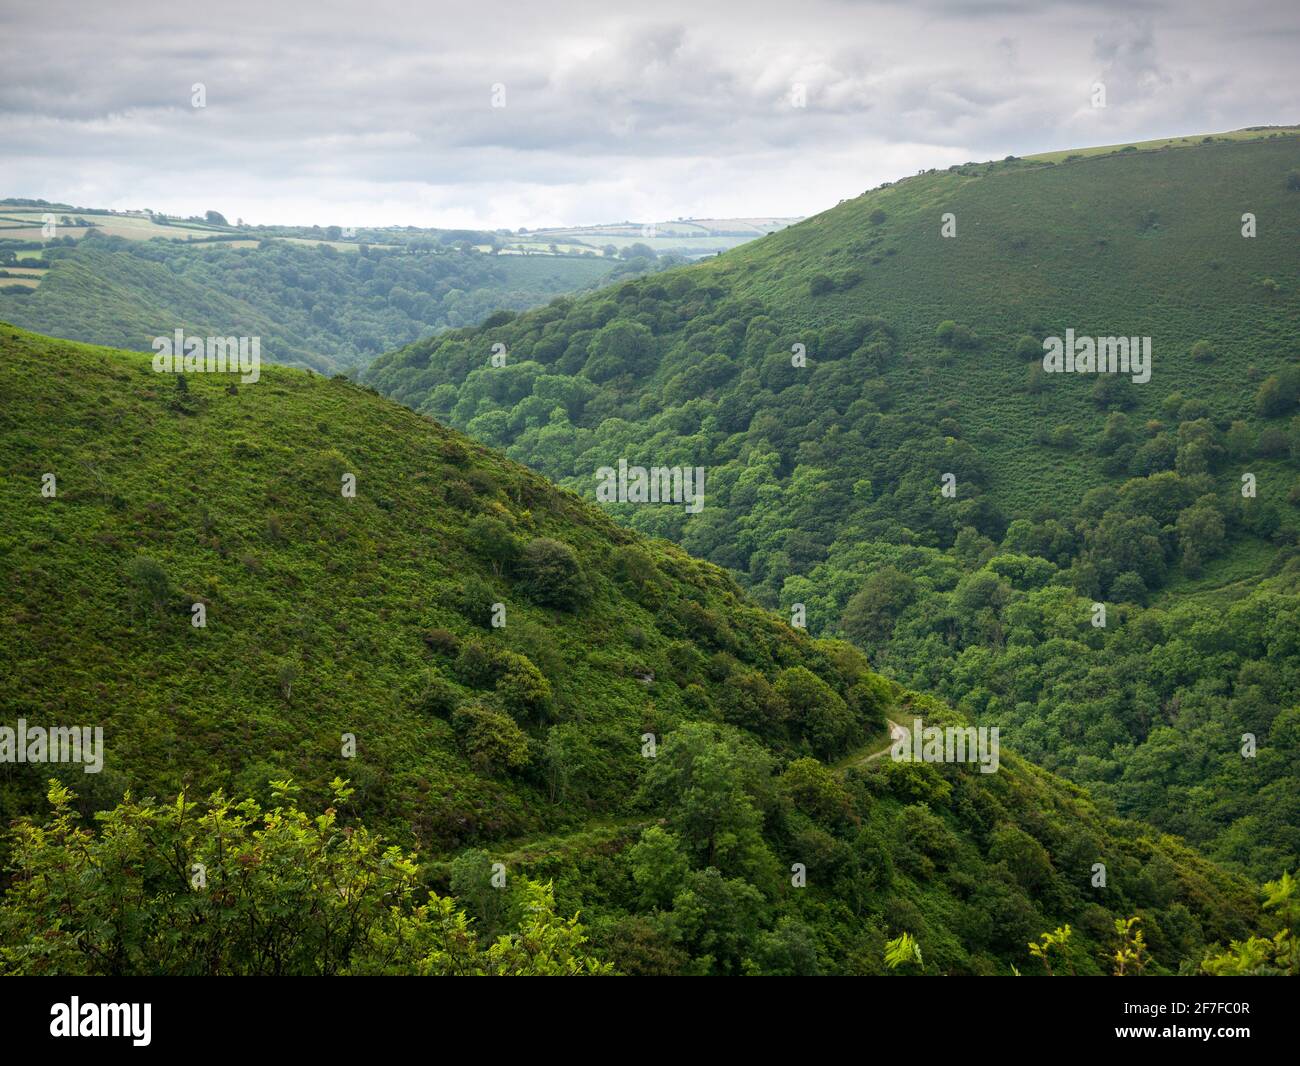 The Heddon Valley and Heddon’s Mouth Cleave from above Hill Brook near Trentishoe in the Exmoor National Park, North Devon, England. Stock Photo